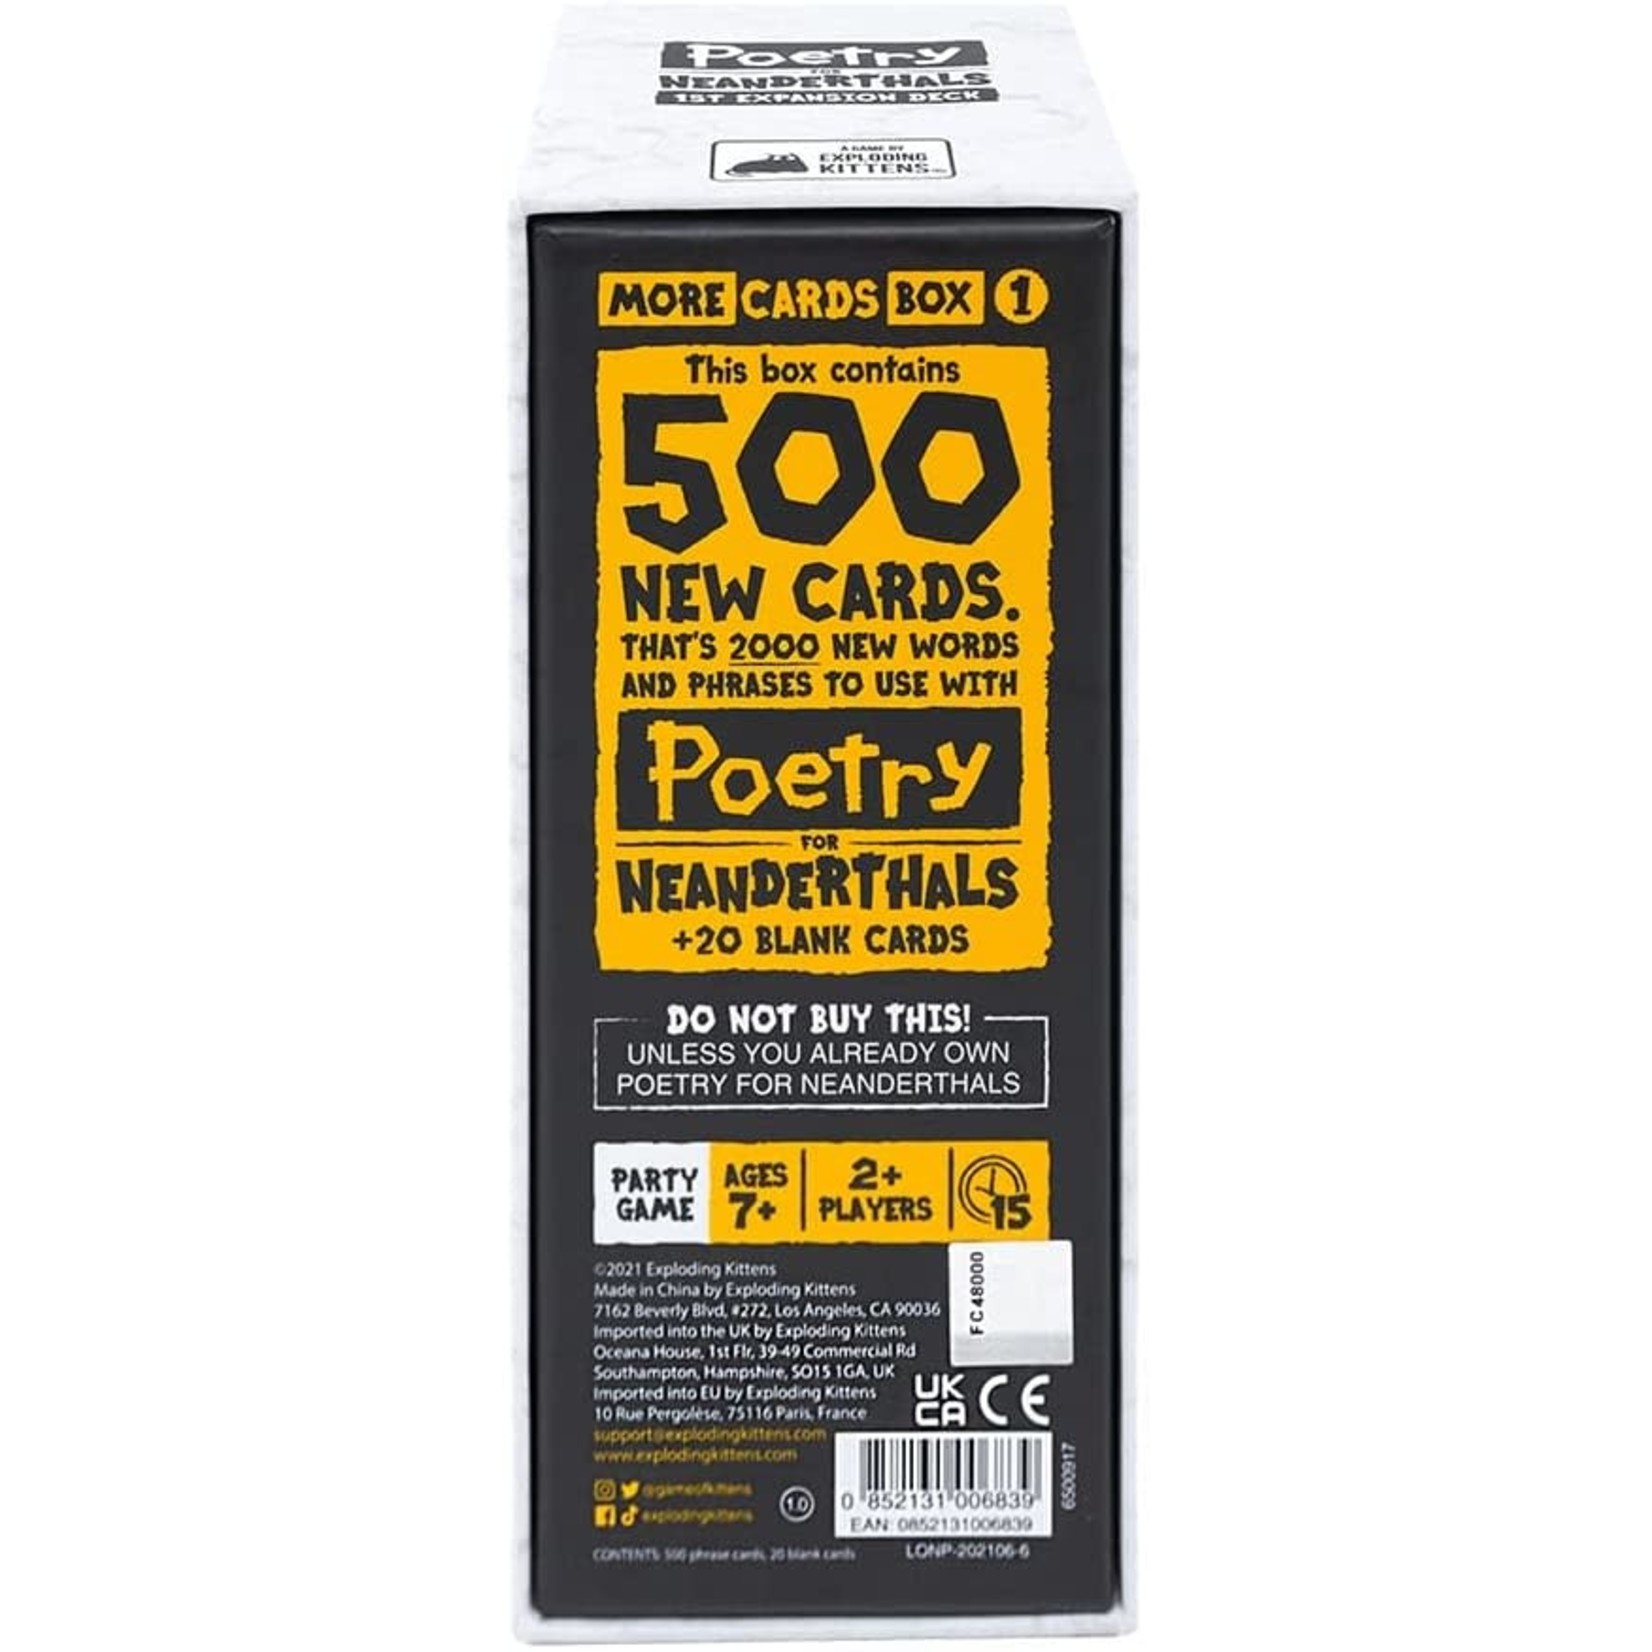 Exploding Kittens Poetry for Neanderthals: More Cards Box 1